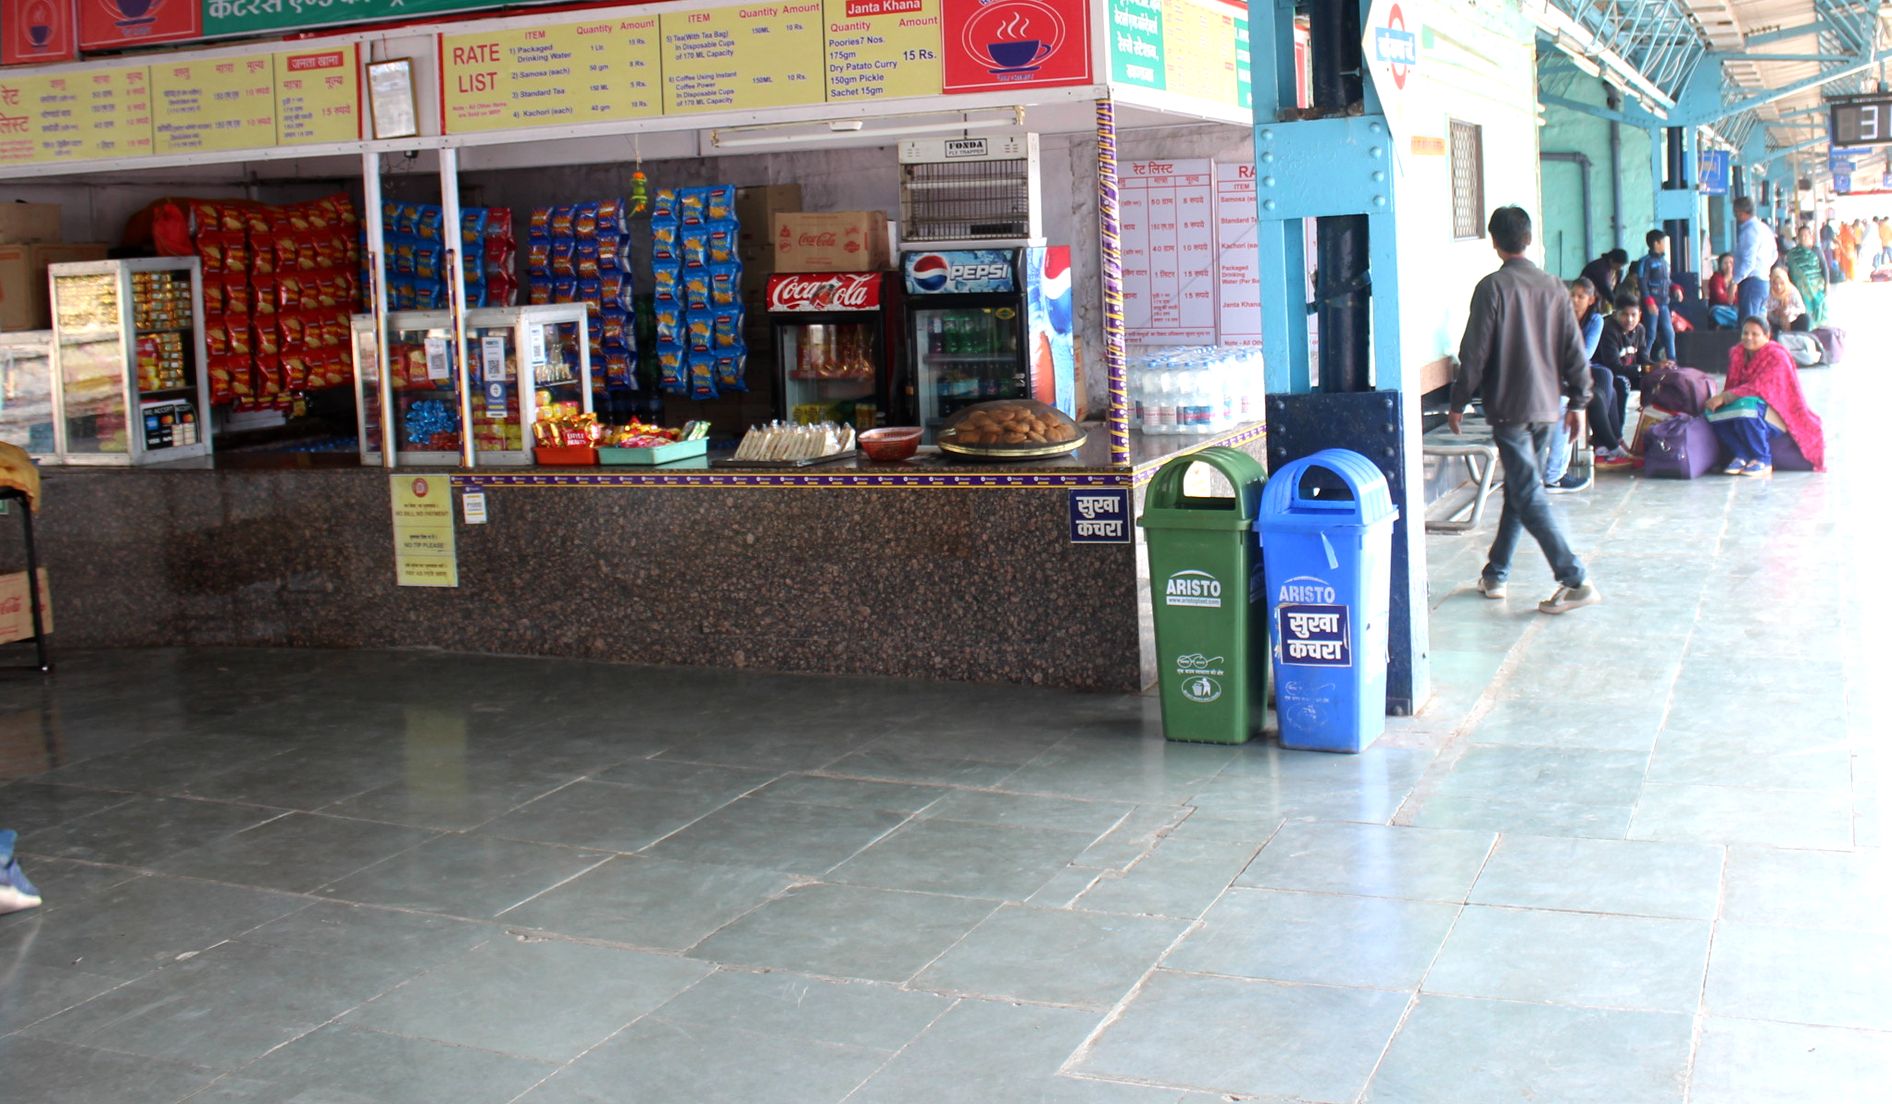 Public food disappeared from railway station stalls